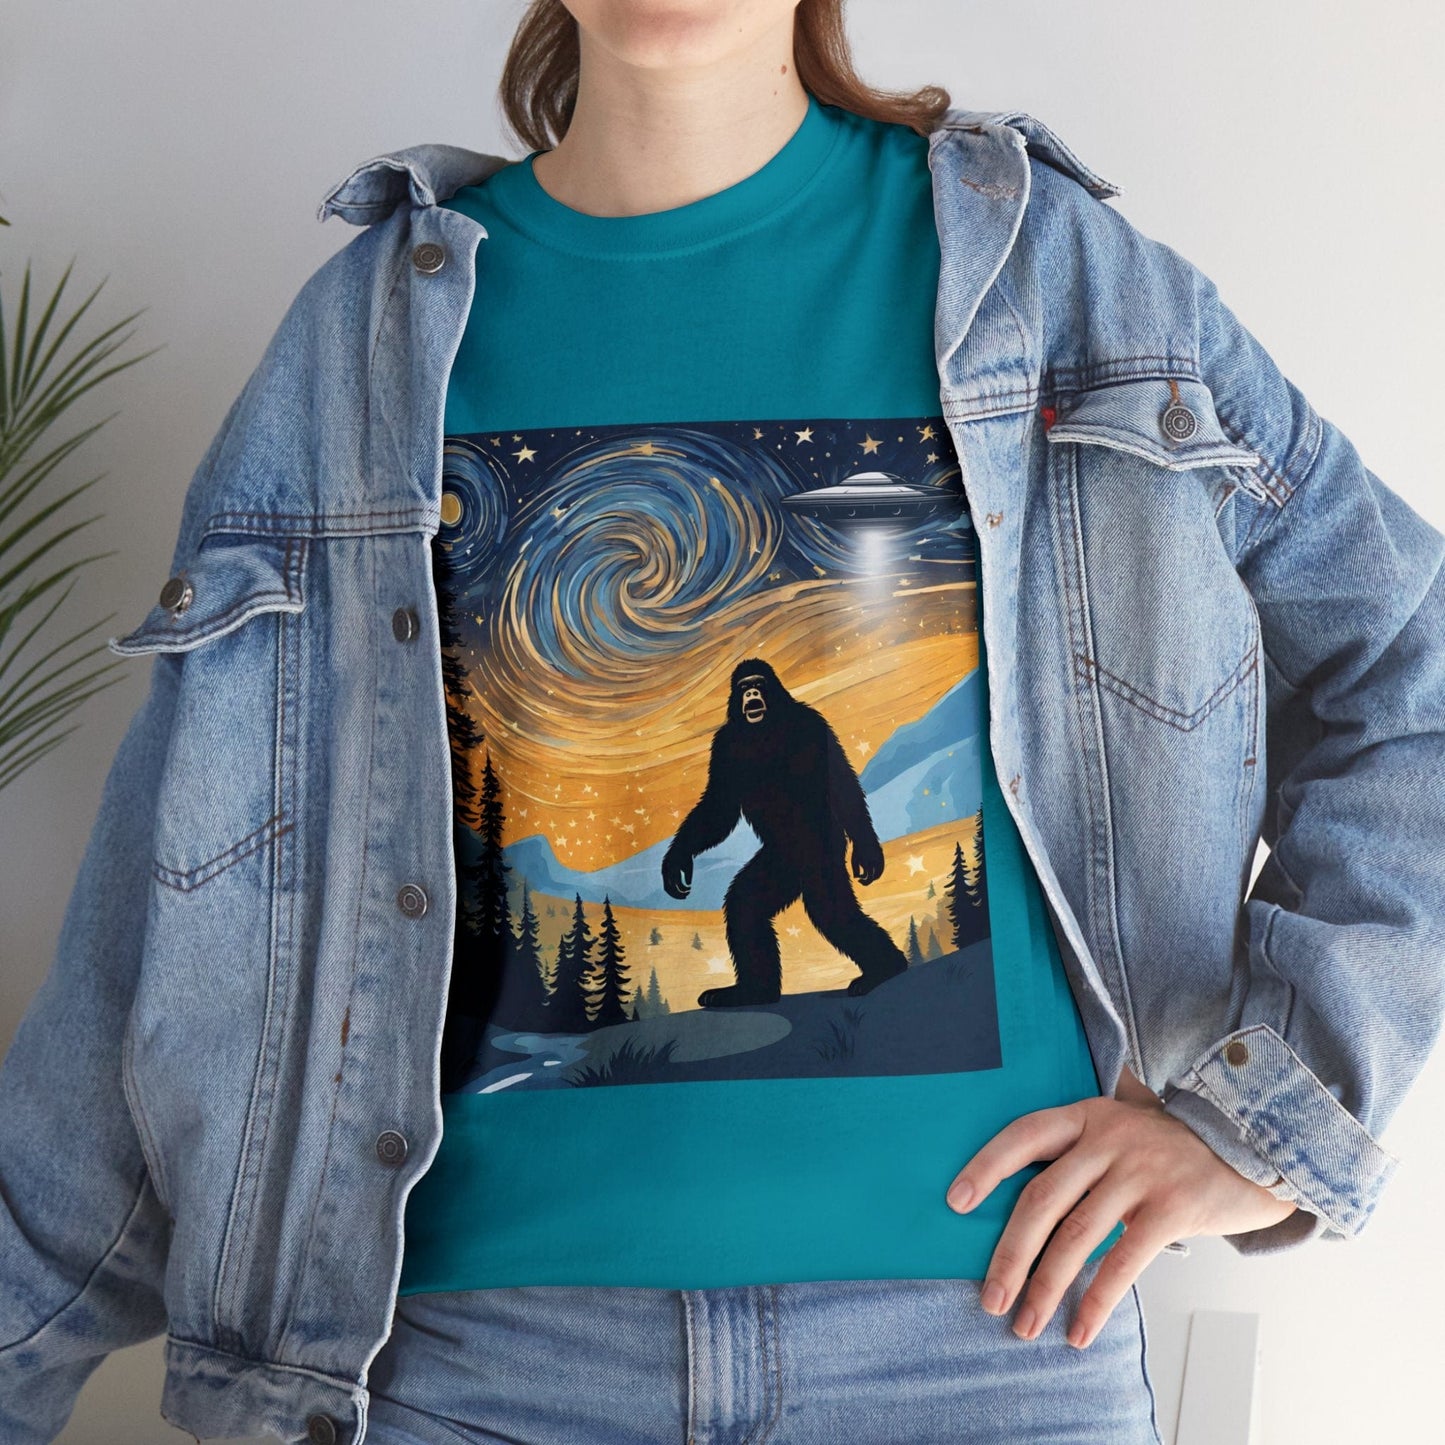 Funny Starry Night Stroll Bigfoot Encounters UFO Abduction, Starry Night Vintage T-Shirt, Funny Bigfoot T-Shirt, Big foot Alien Tee, Funny Bigfoot Starry Night Shirt, Van Gogh Shirt By Flashlander